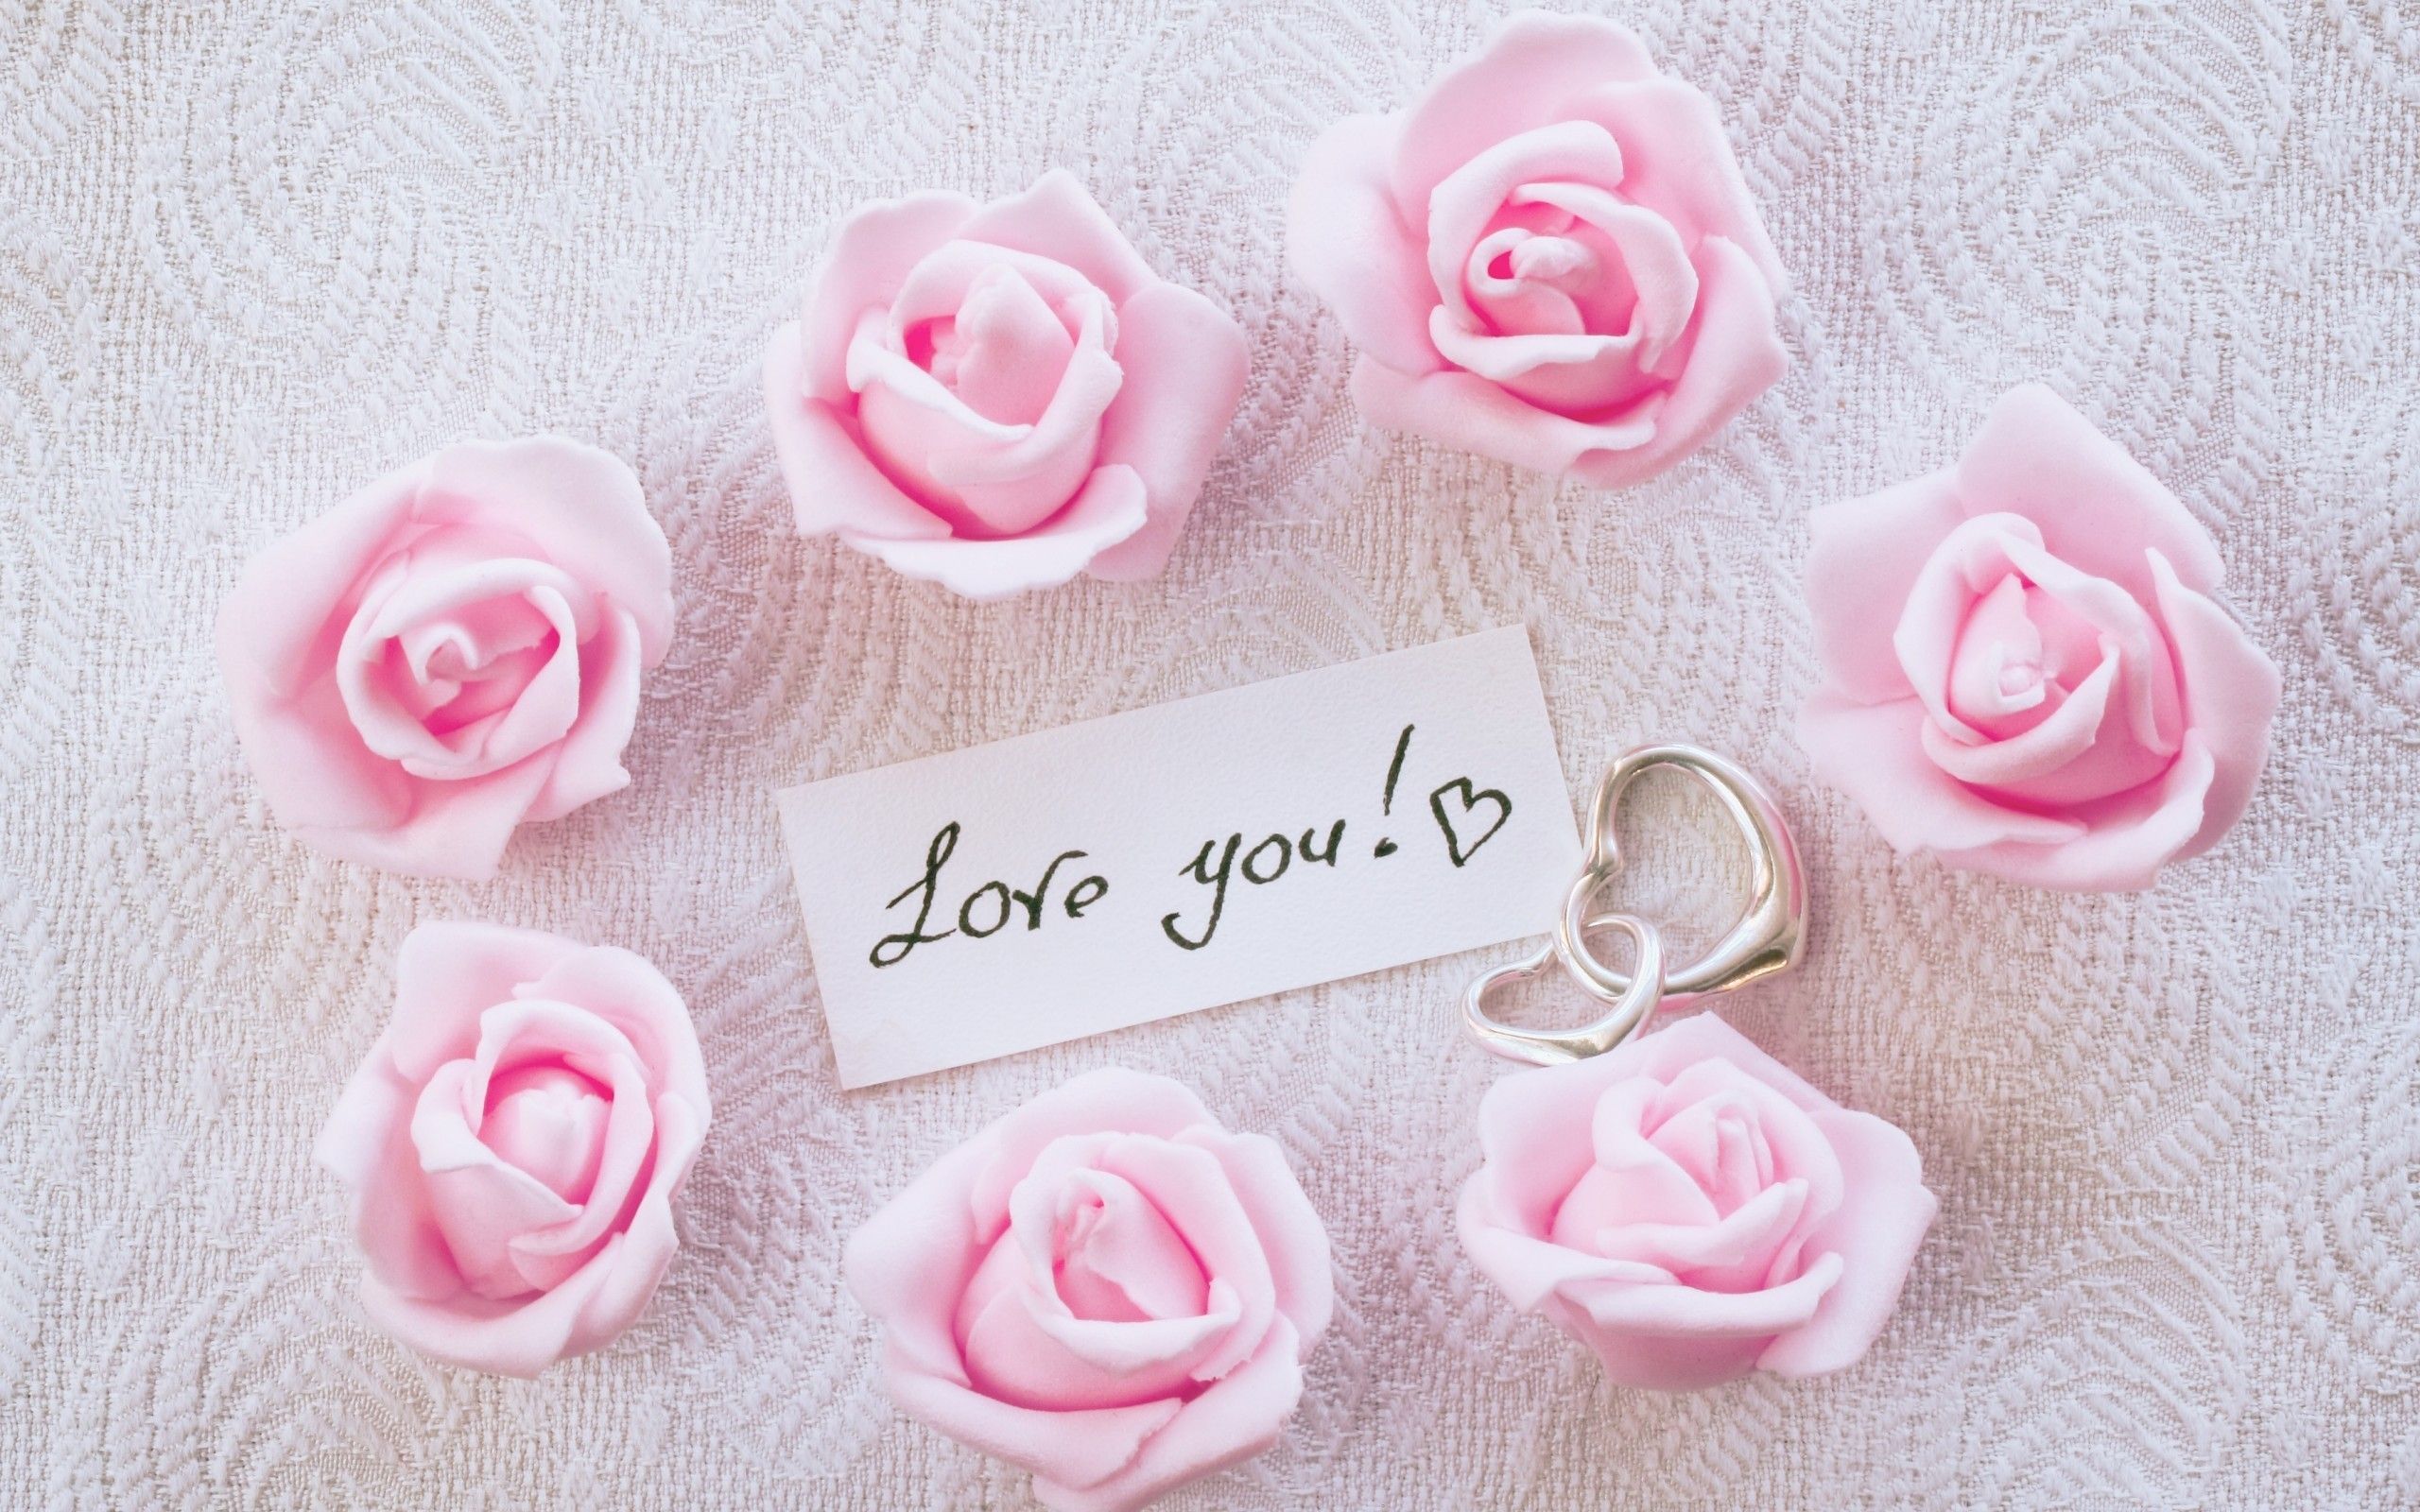 Download 2560x1600 Pink Roses, Love You, Letter Wallpaper